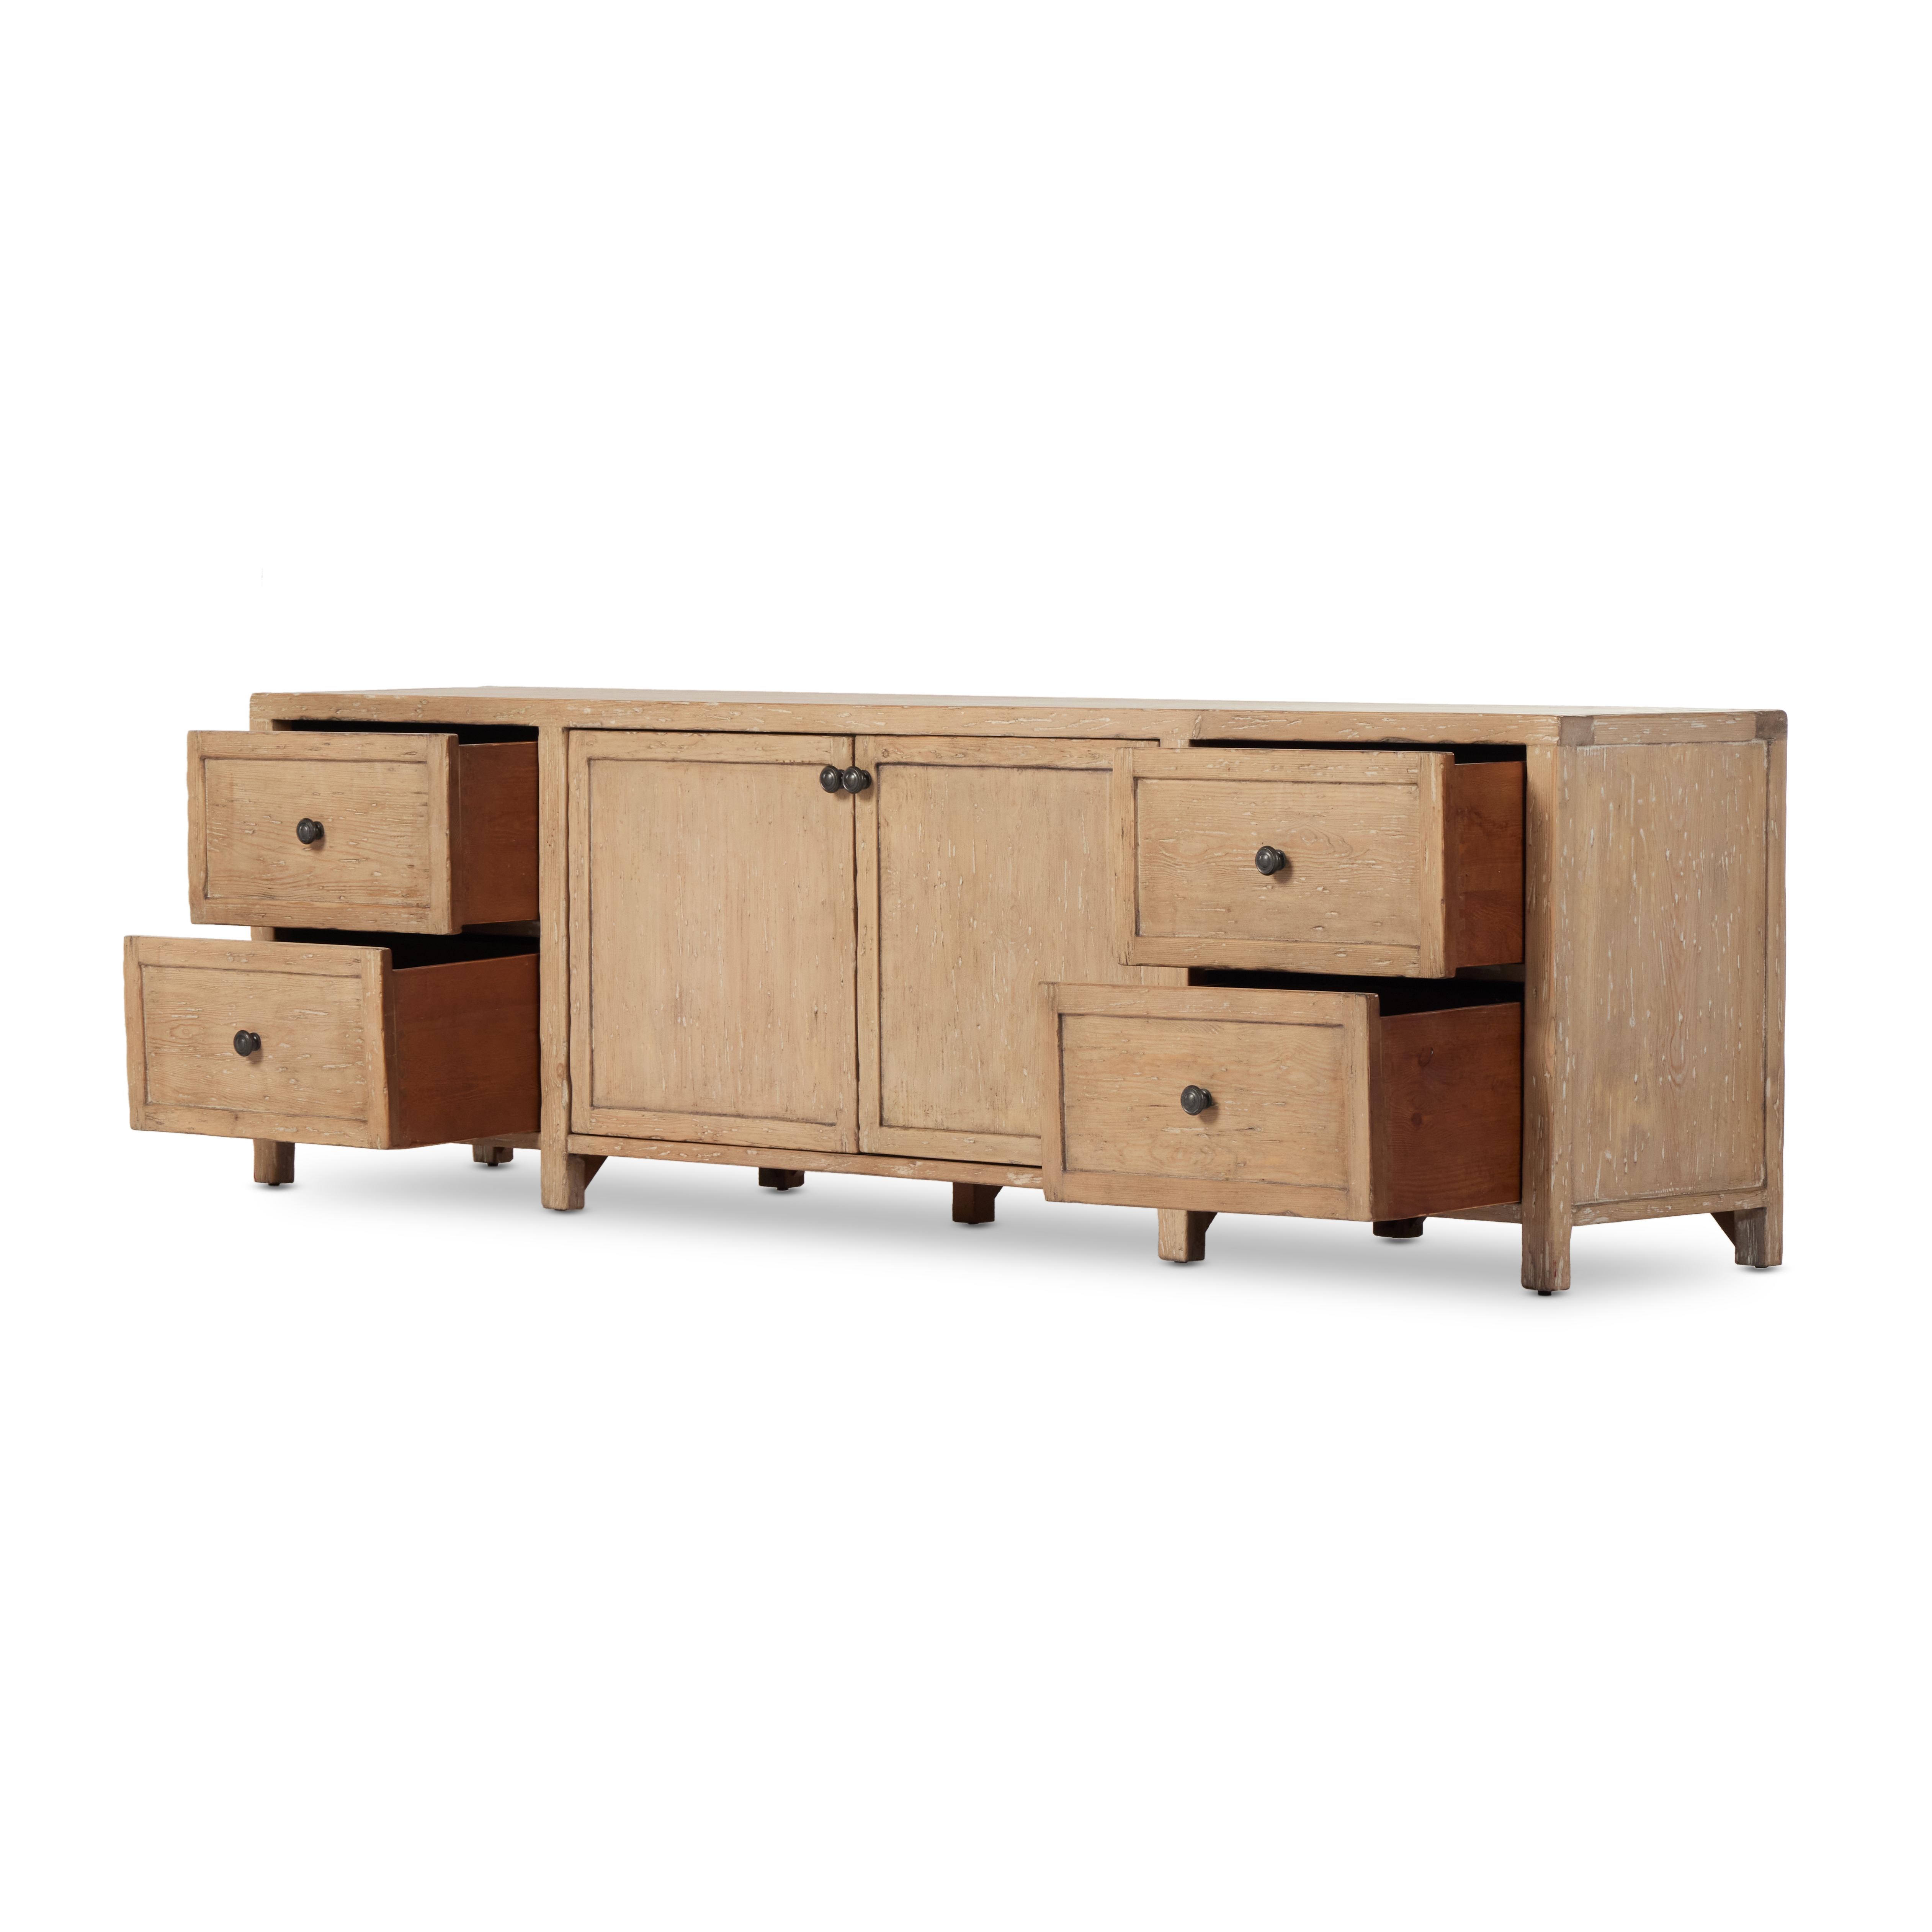 Gaines Media Console-Aged Light Pine - Image 5